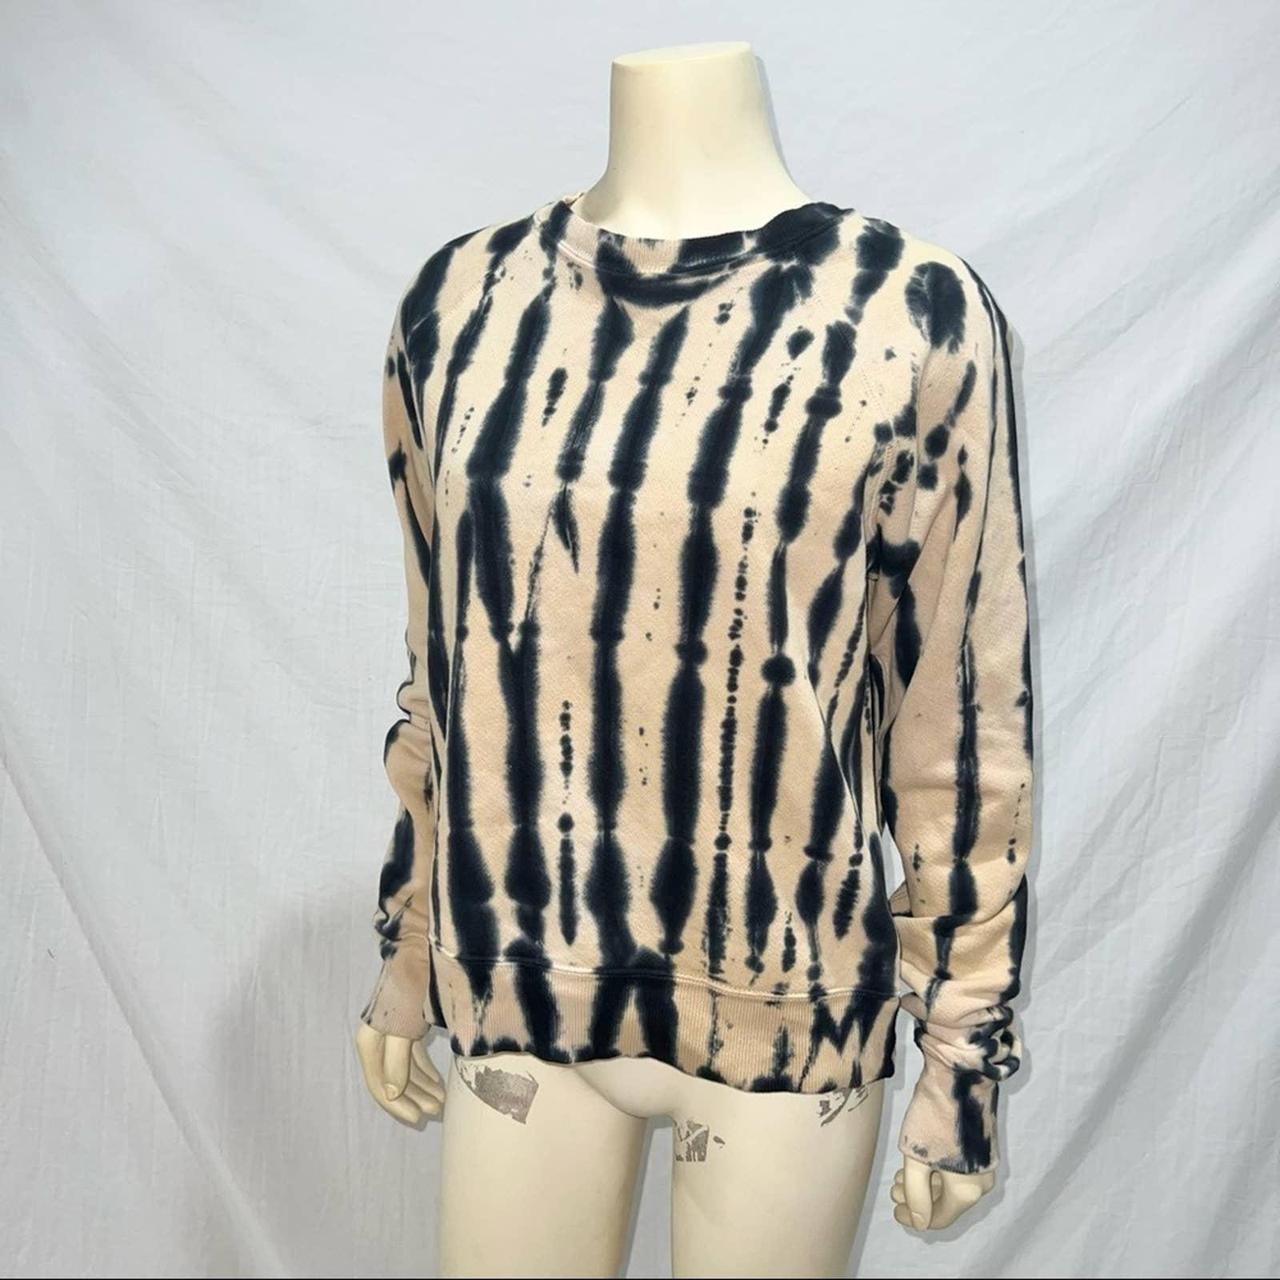 Product Image 1 - Label: Re/Done Hanes
Style: Tiger Dye